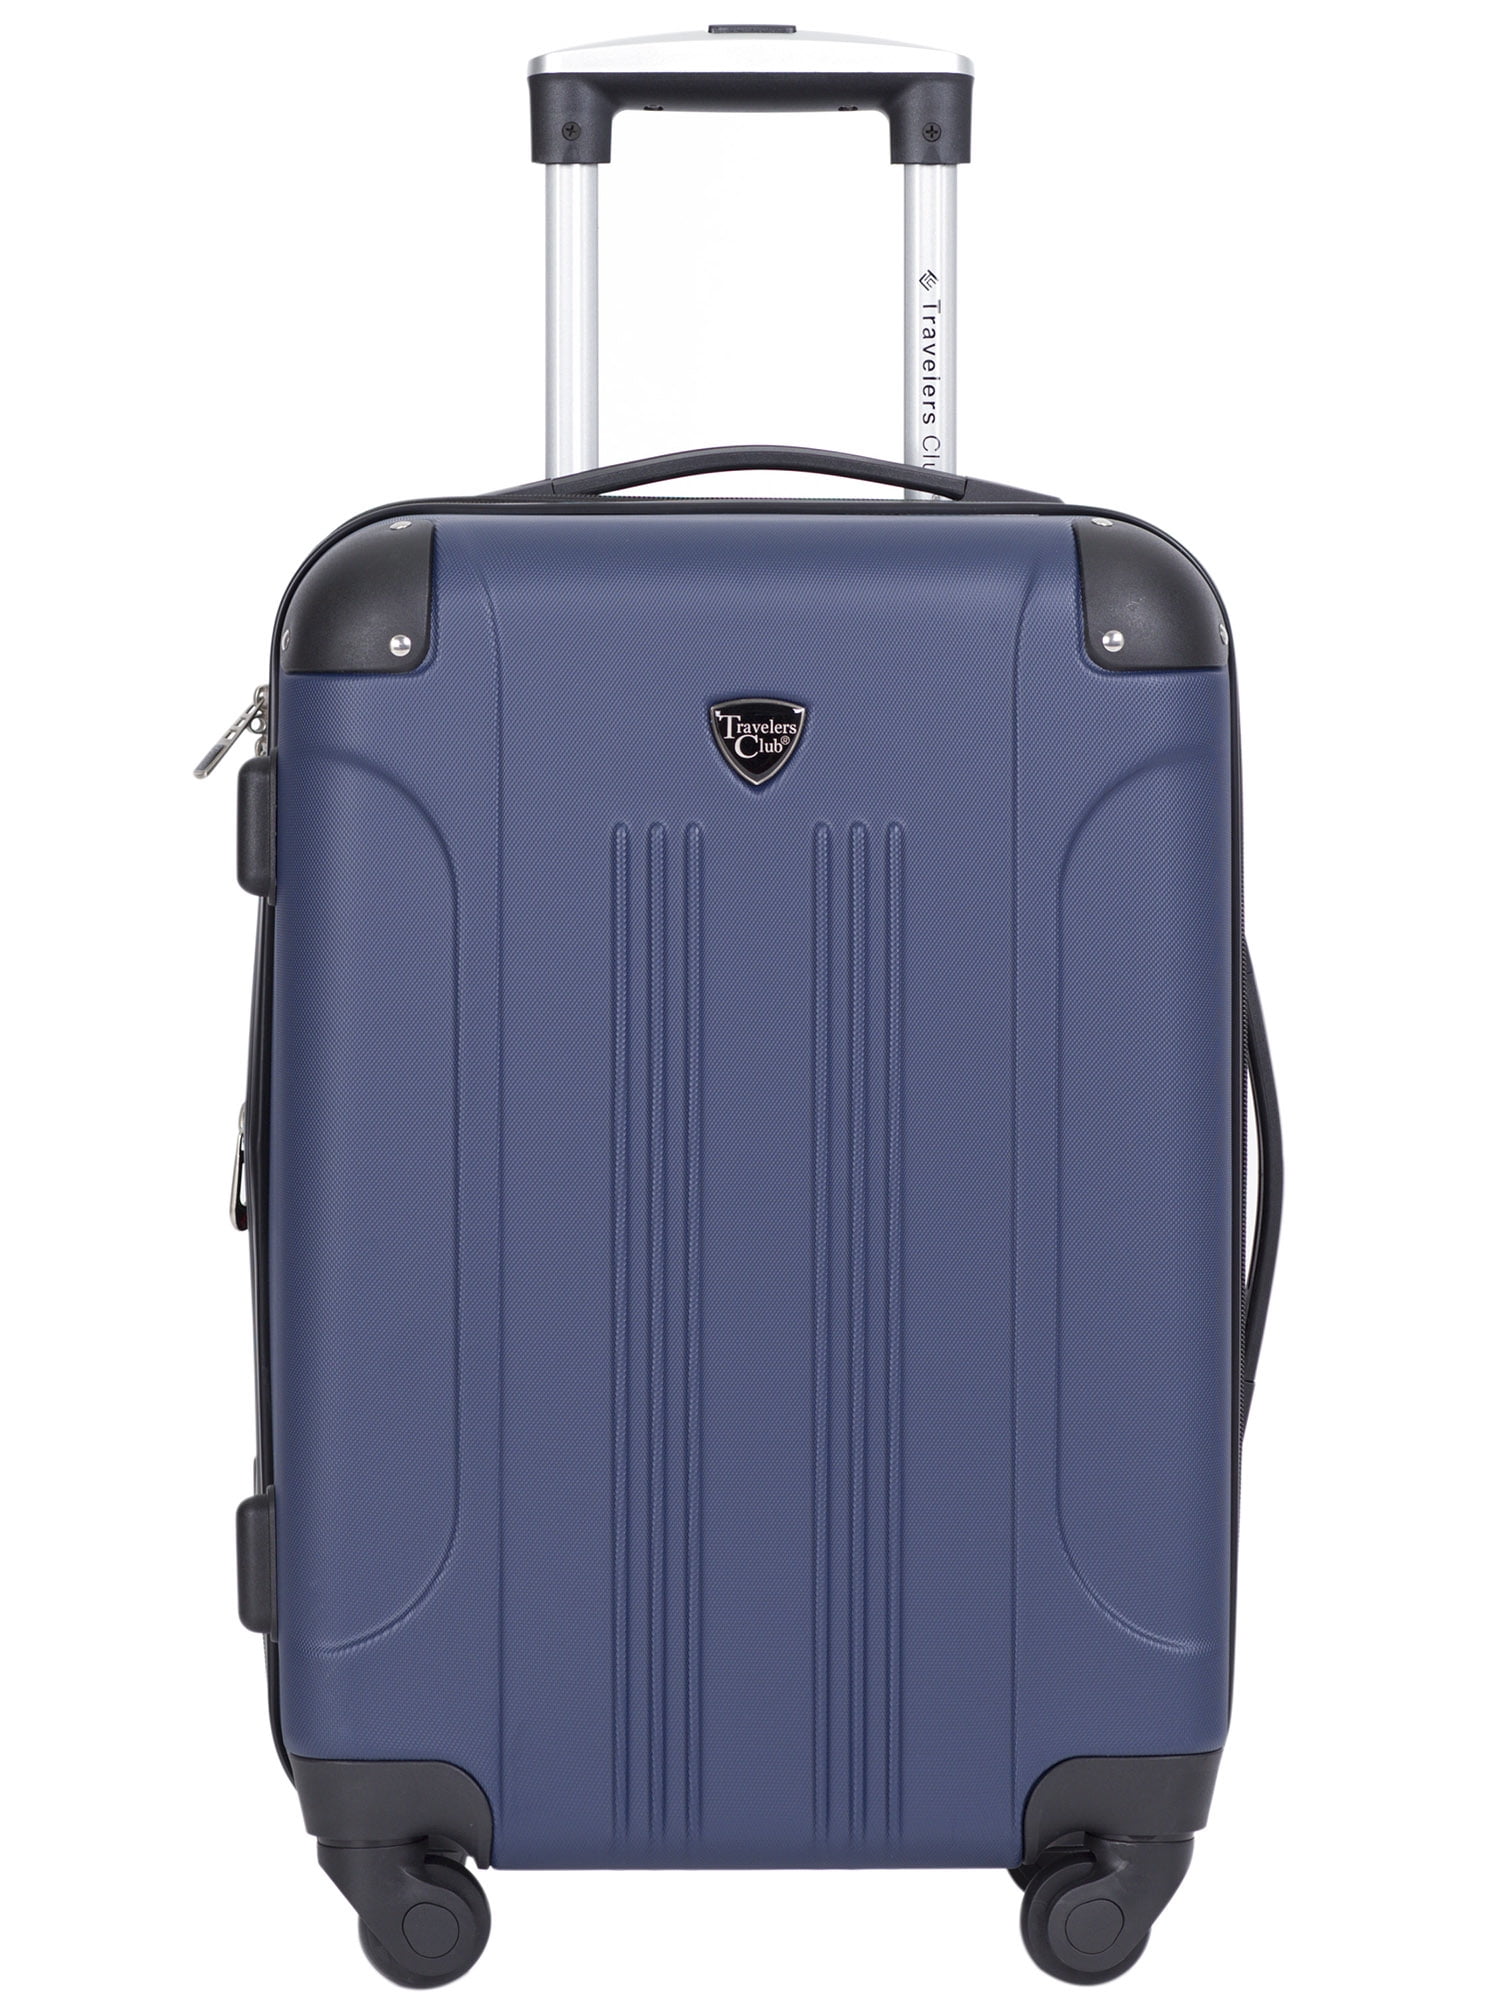 Travelers Club Luggage 20 Rolling Carry-On Navy